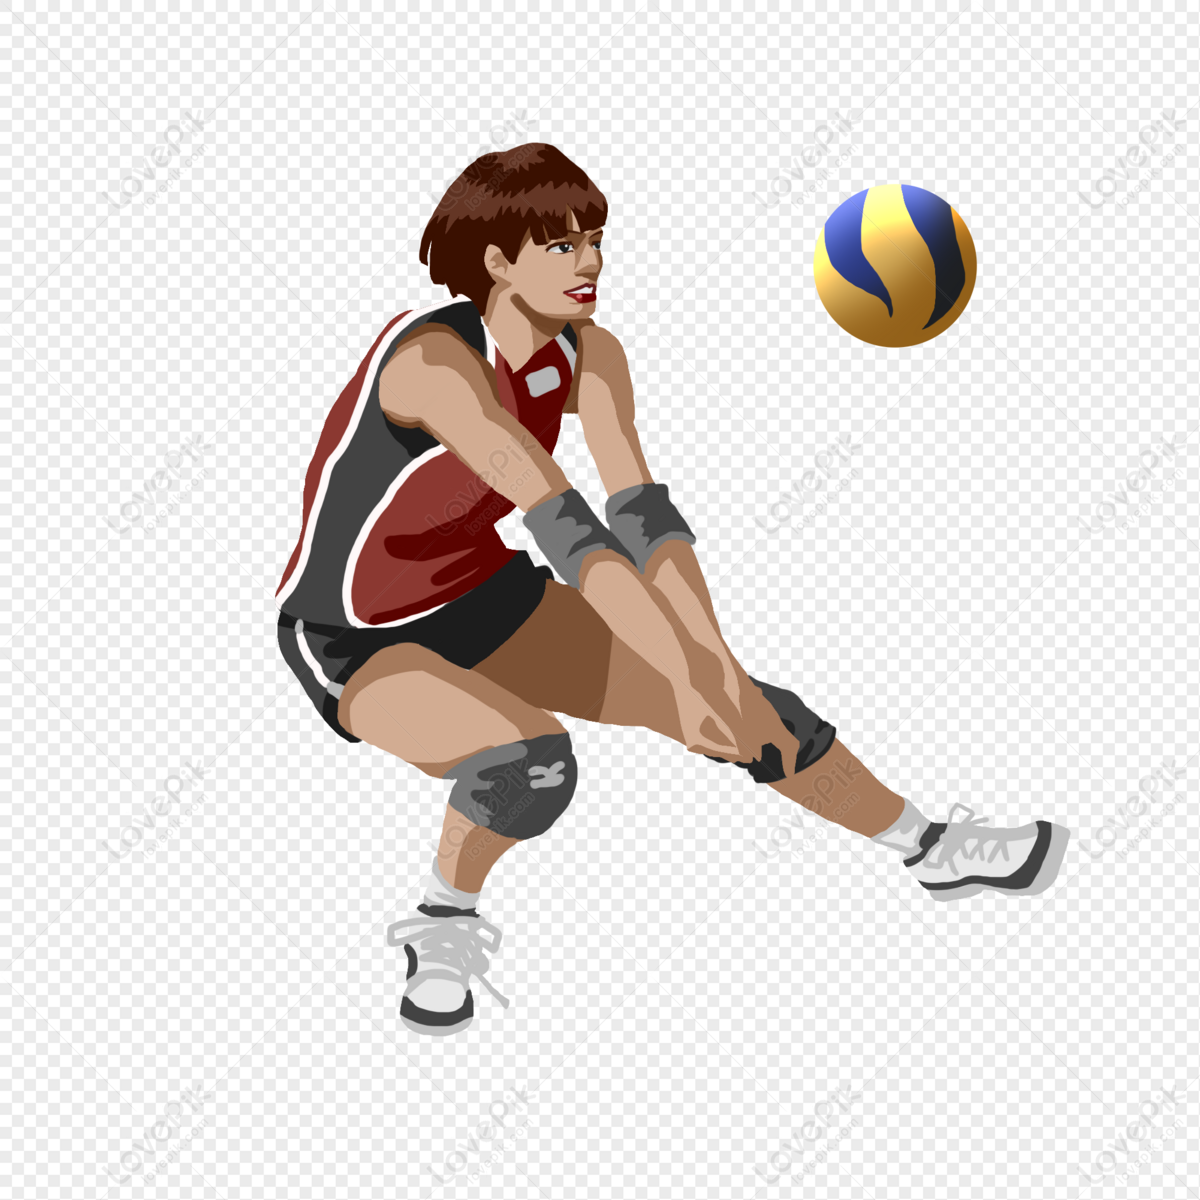 Volleyball Player PNG Transparent Image And Clipart Image For Free ...